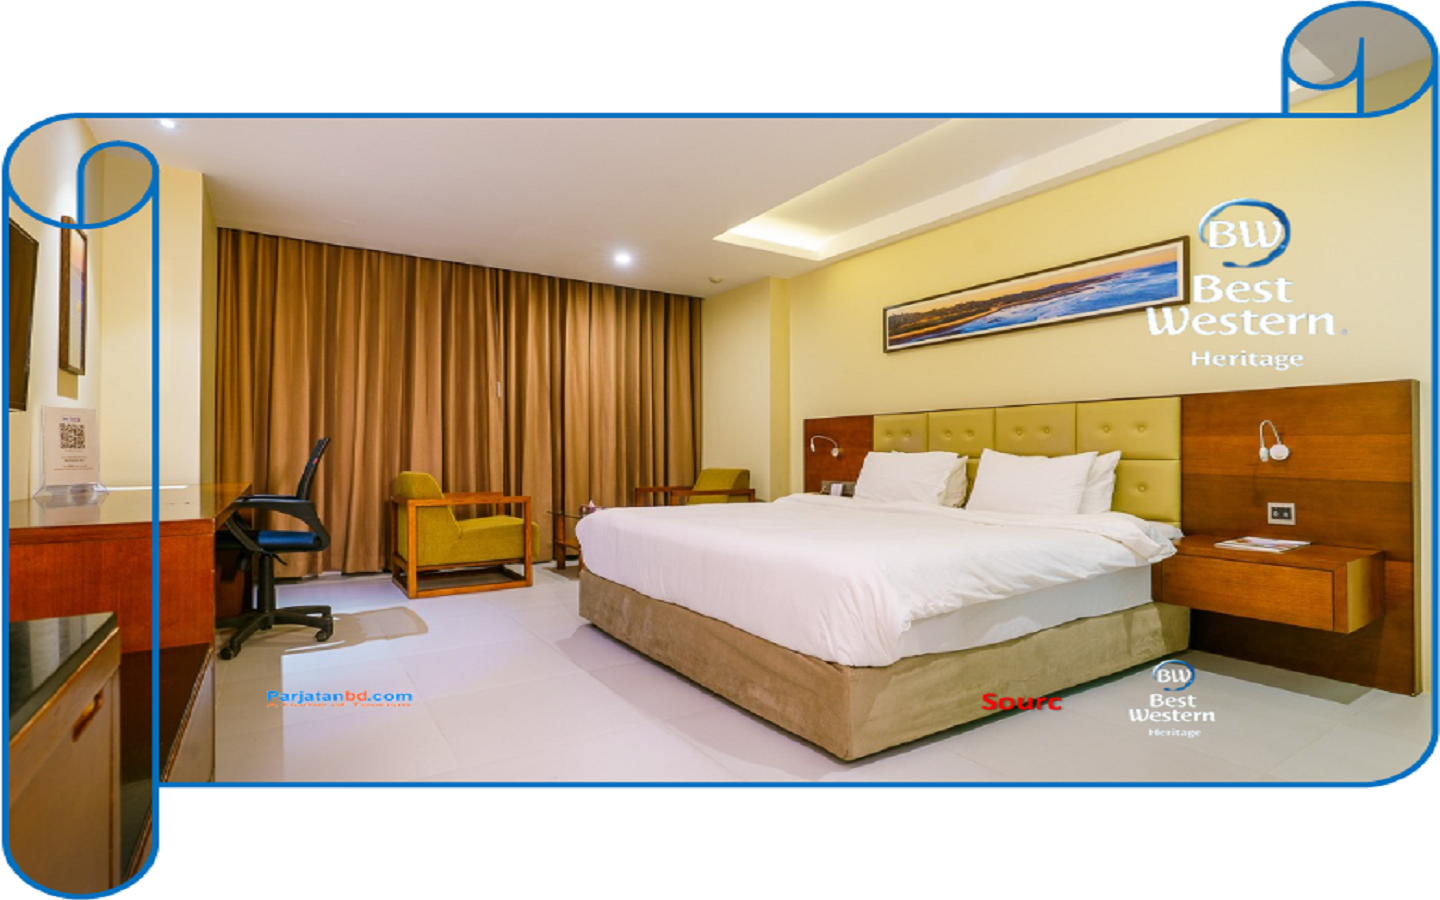 Room Deluxe Double Hill View -1, Best Western Heritage Hotel, Coxs Bazar